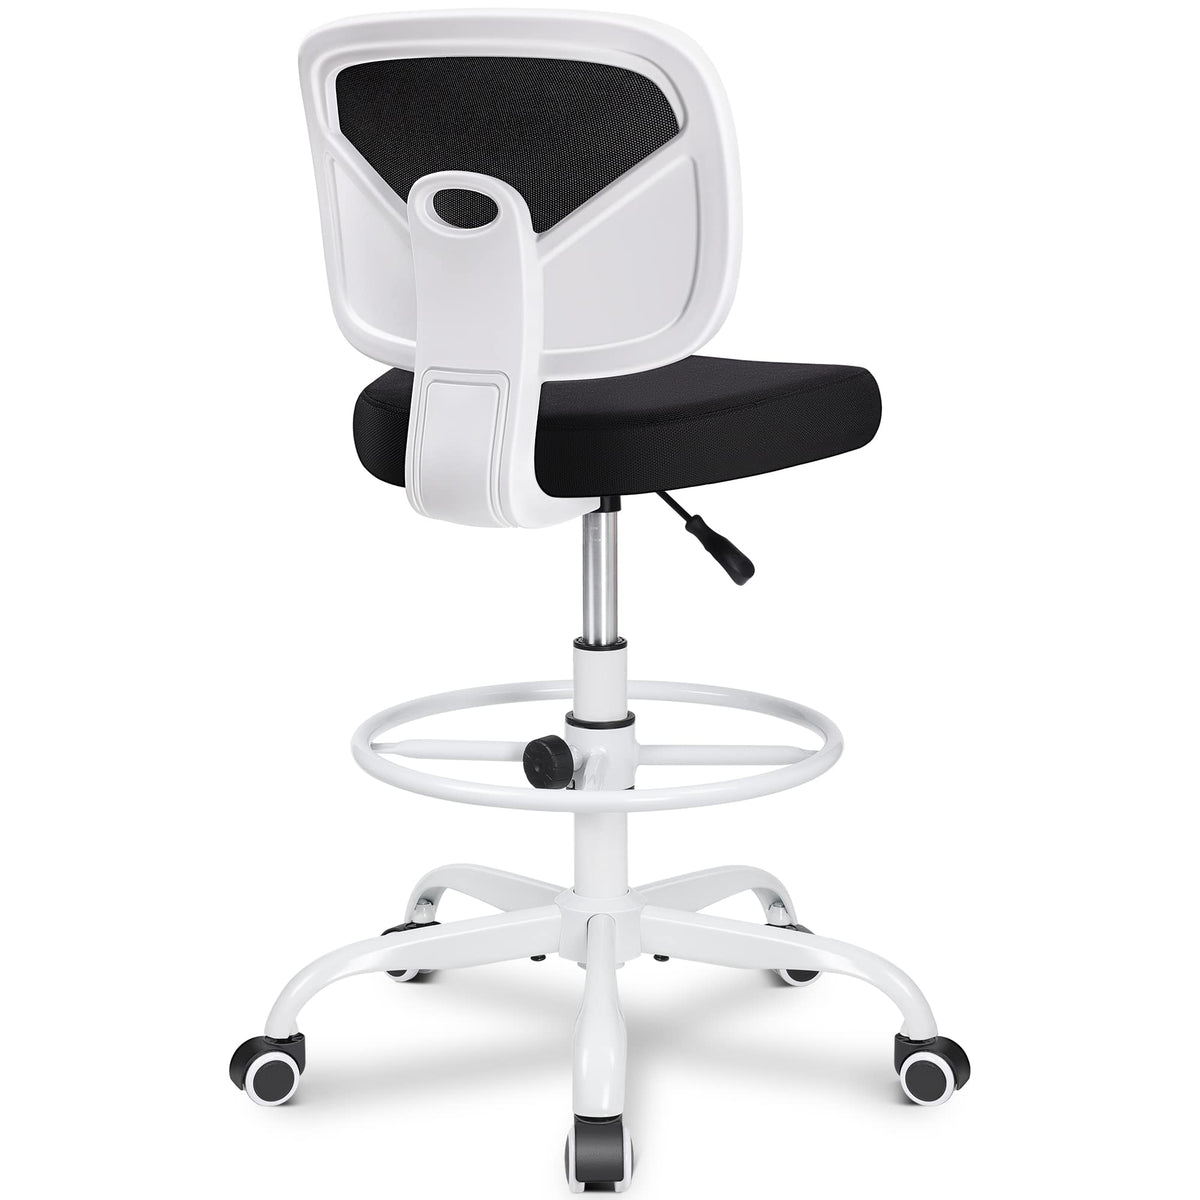 Primy Office Drafting Chair Armless, Tall Office Desk Chair